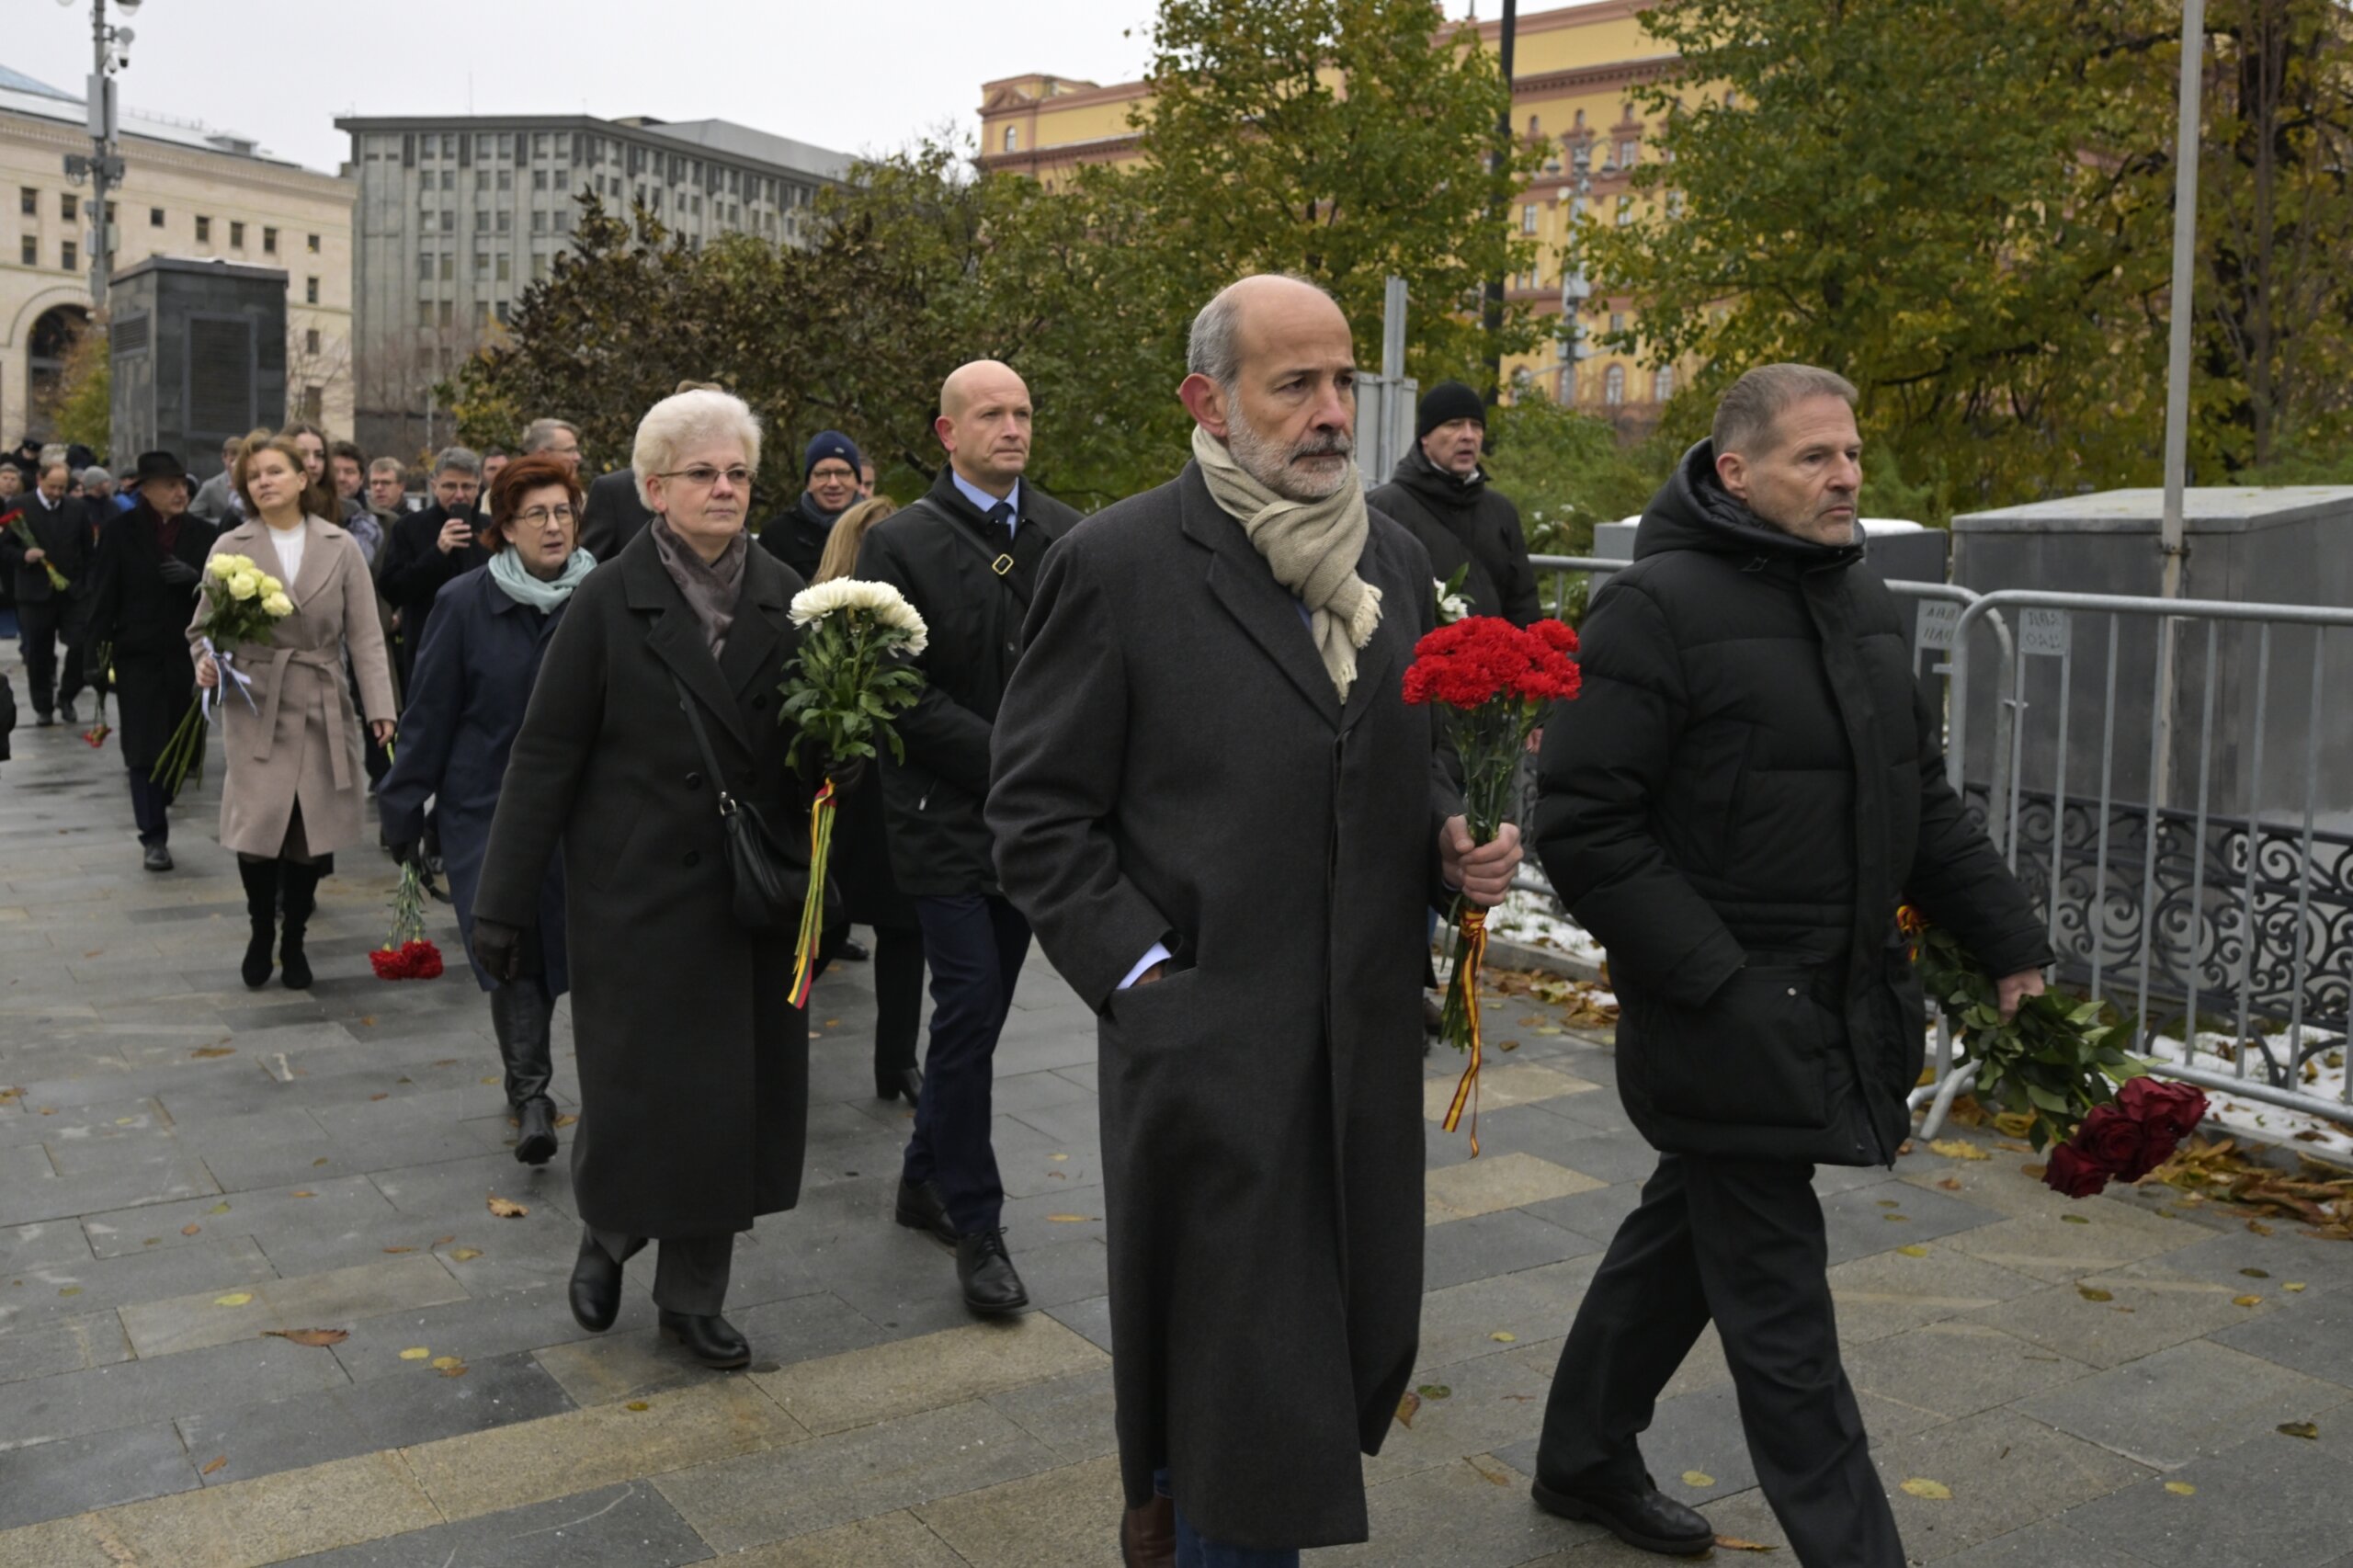 Russians commemorate victims of Soviet repression as a present-day crackdown on dissent intensifies